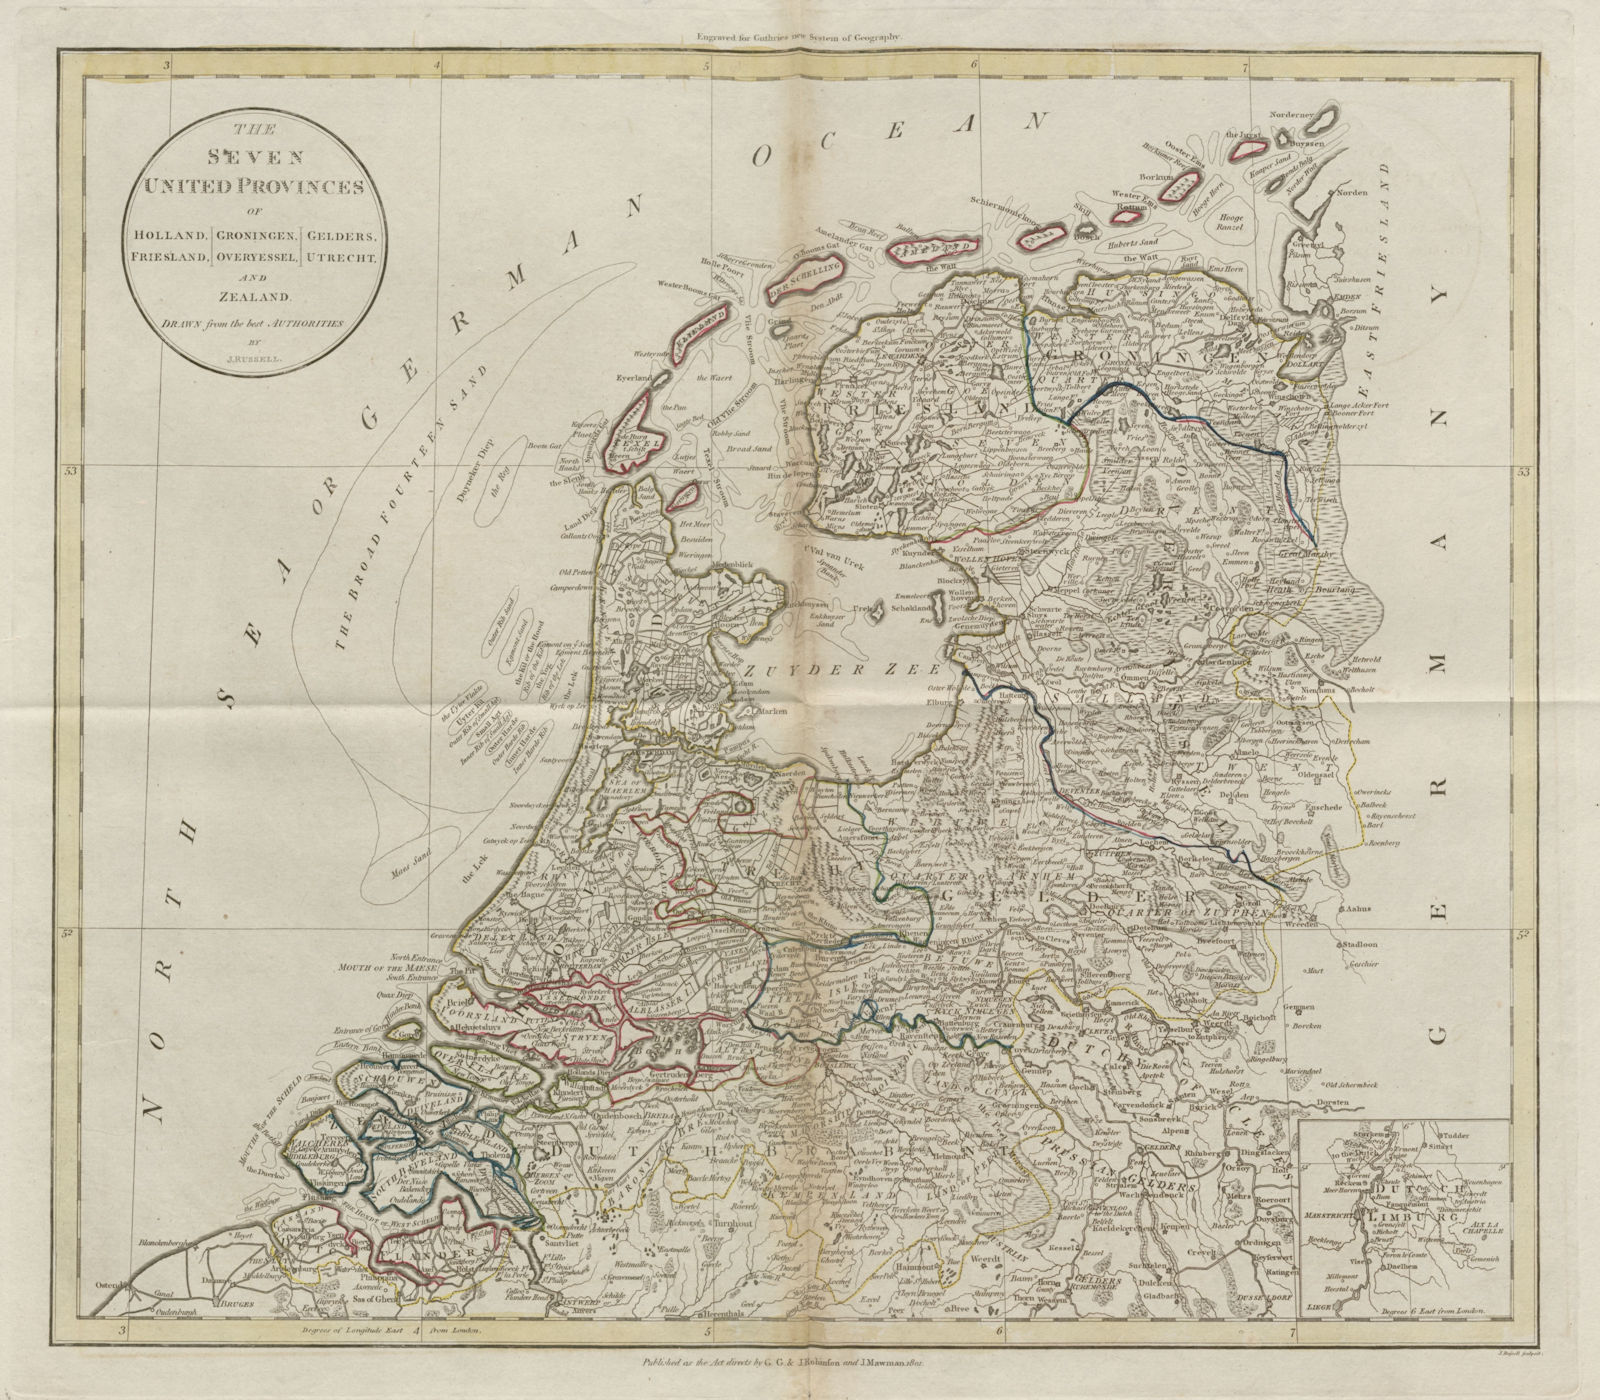 "The Seven United Provinces of Holland, Groningen, Gelders…". RUSSELL 1801 map